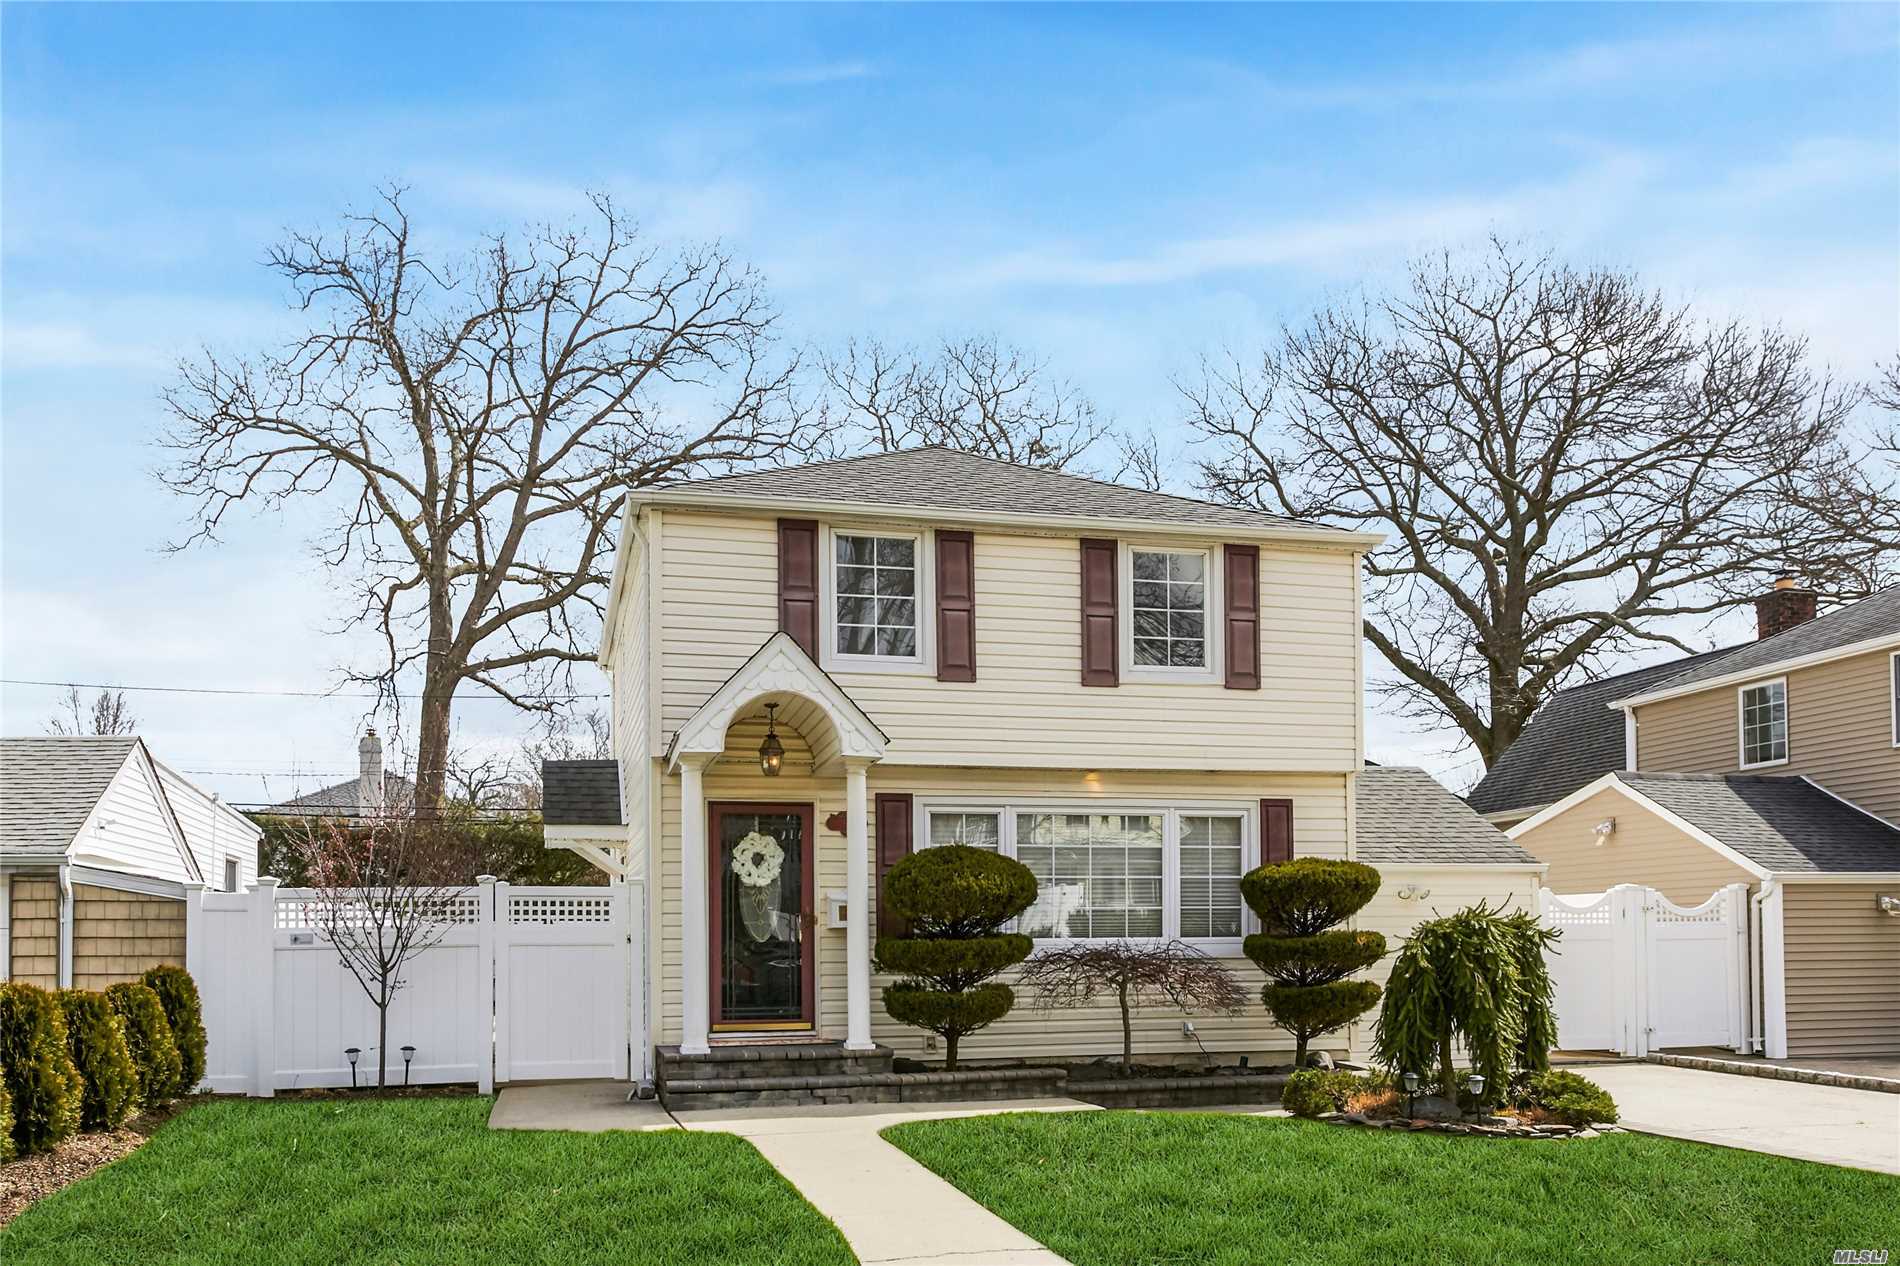 Beautiful And Immaculate One Family Home That Sits On A Generous Size Lot , Modern Kitchen With Granite , 2 Modern Full Bathrooms, 3 Bedrooms And Beautiful Hardwood Floors, The Home Also Has Central Air And Central Heat For Your Comfort.This Home Is A True Turn Key Home.